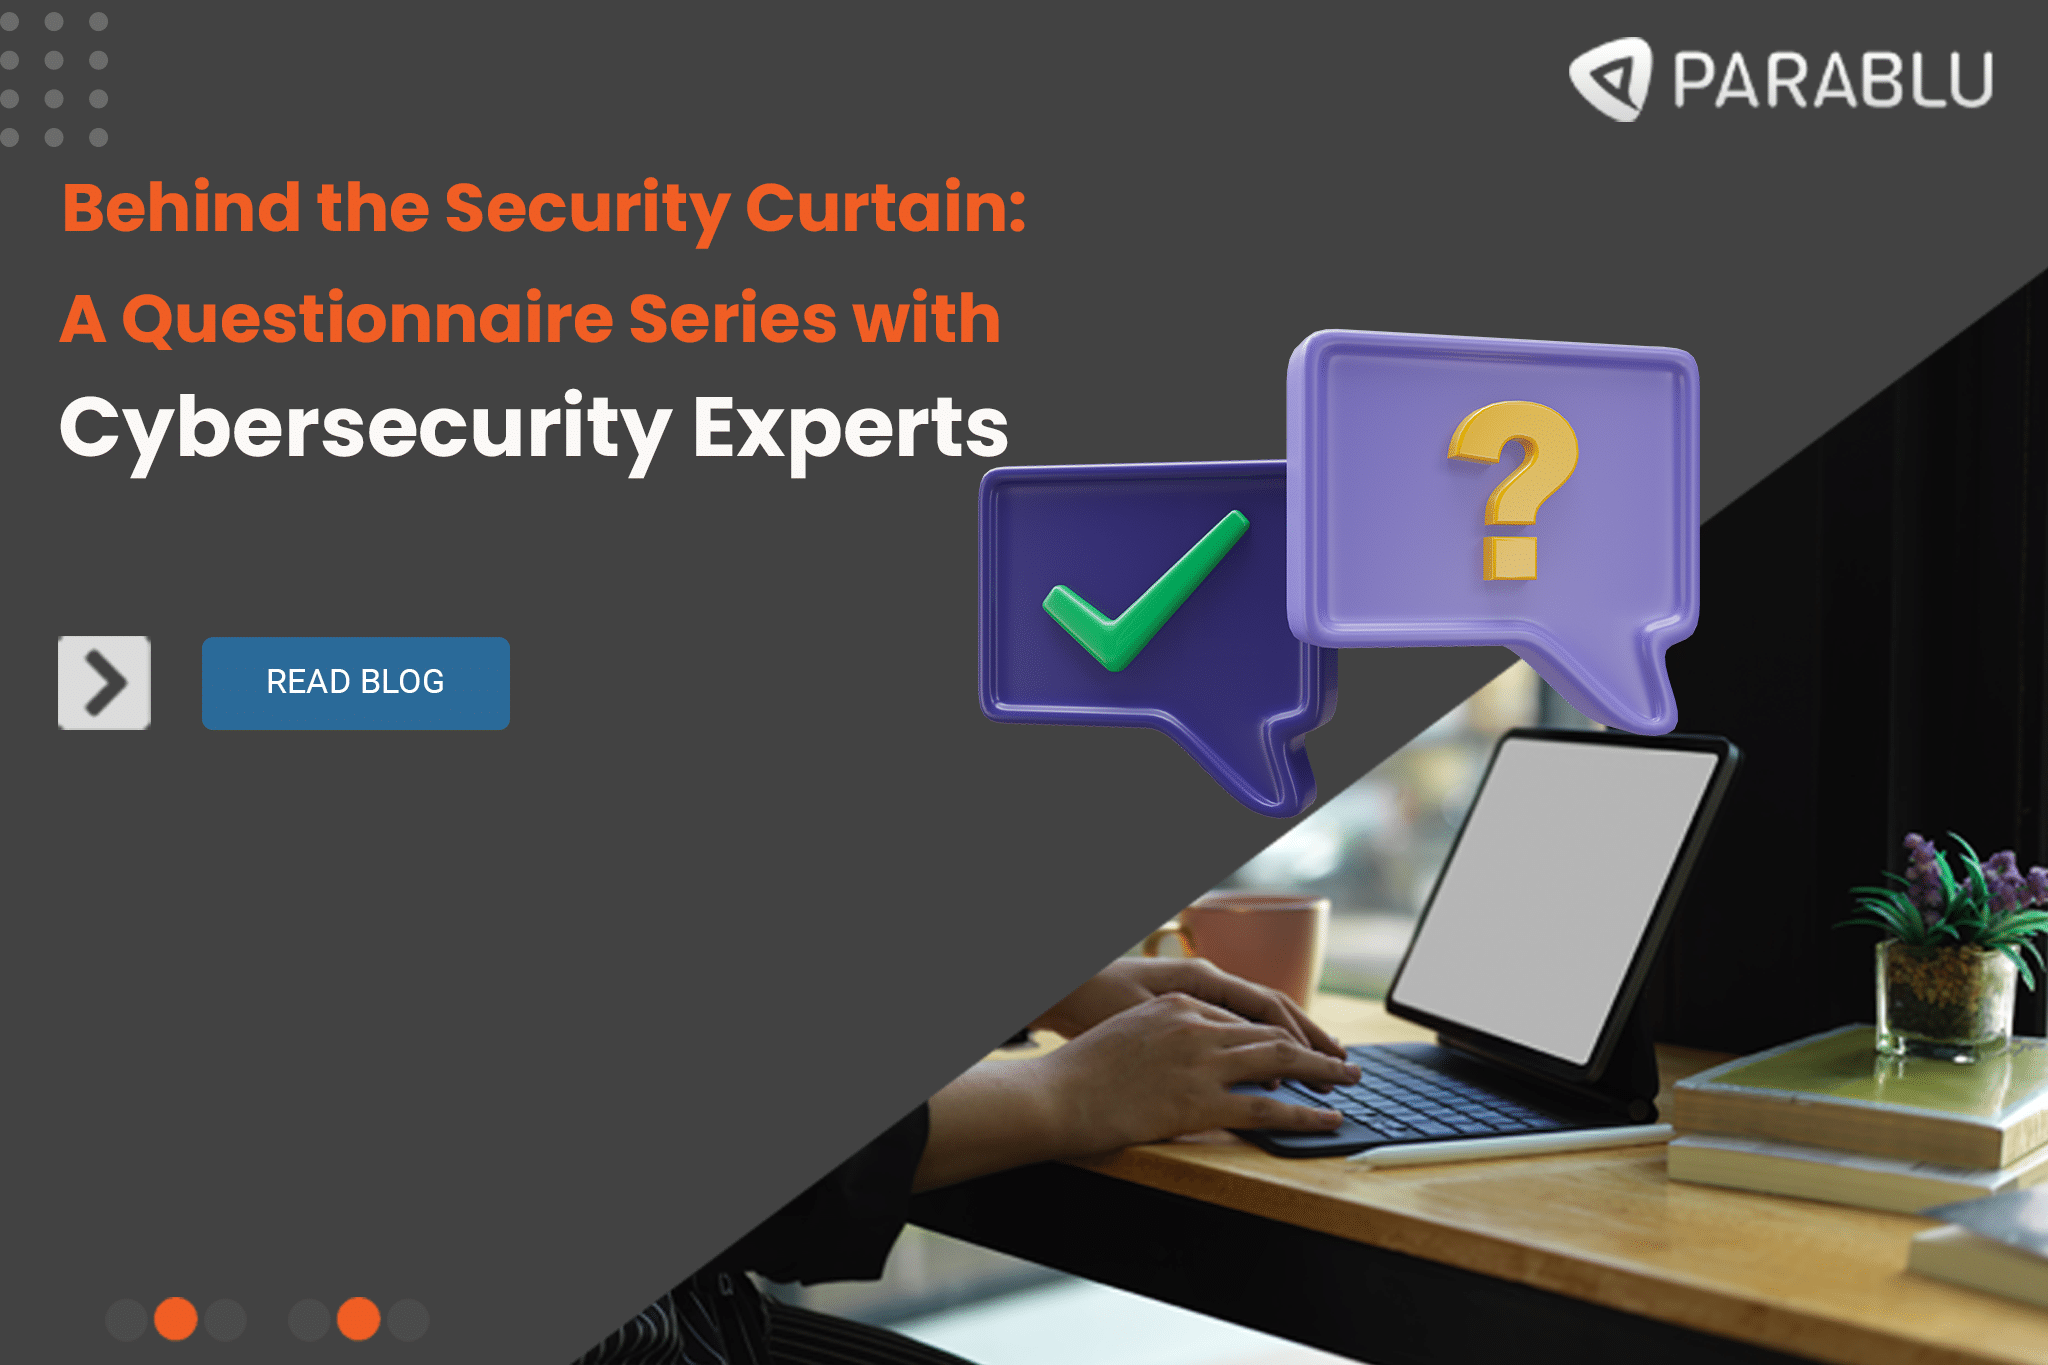 A Questionnaire Series with Cyber Security Experts